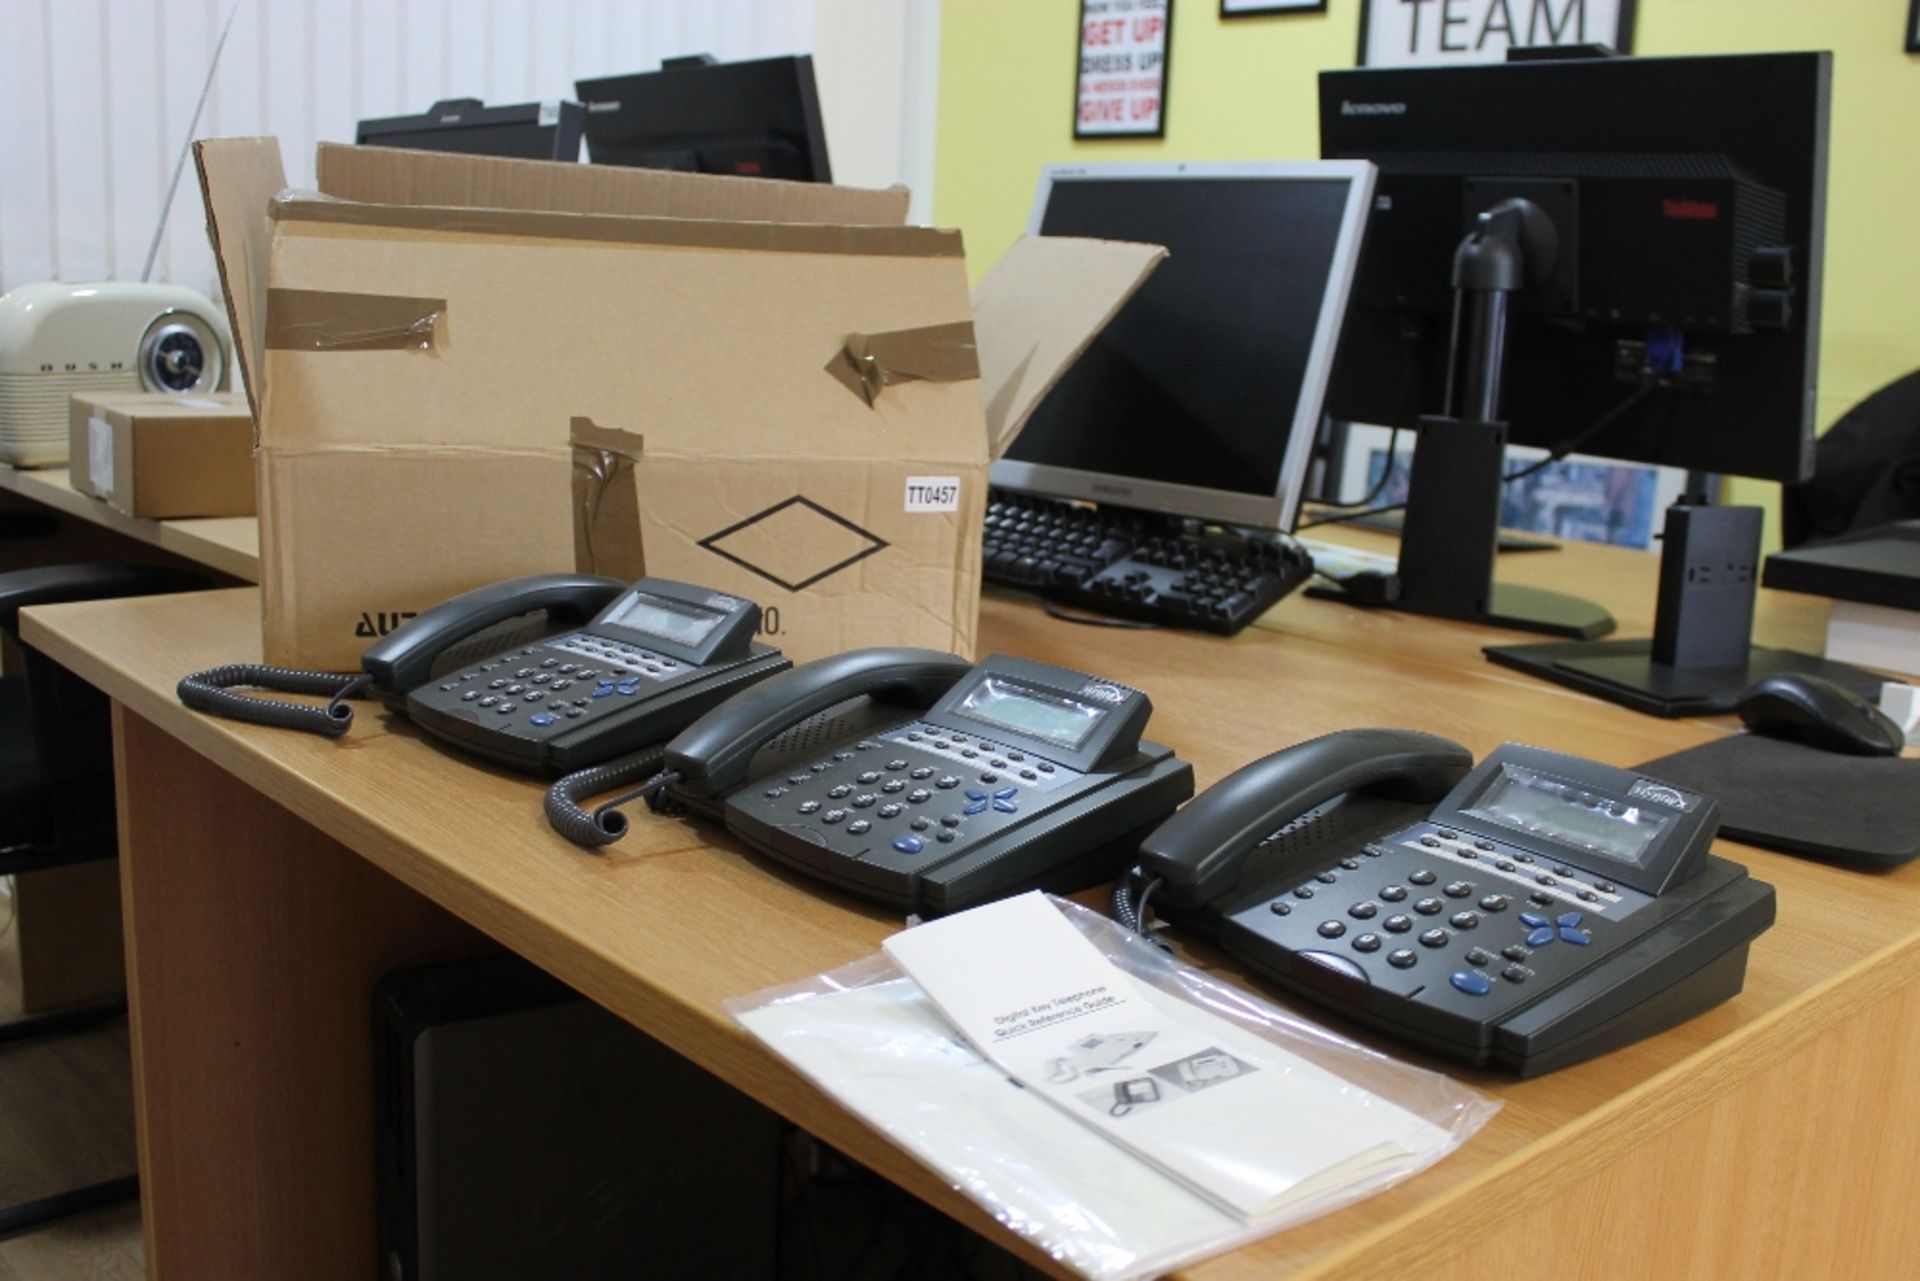 New Telephone System Switchboard PBX Complete Plug & Play 408 + 3 Desk Telephones This super machine